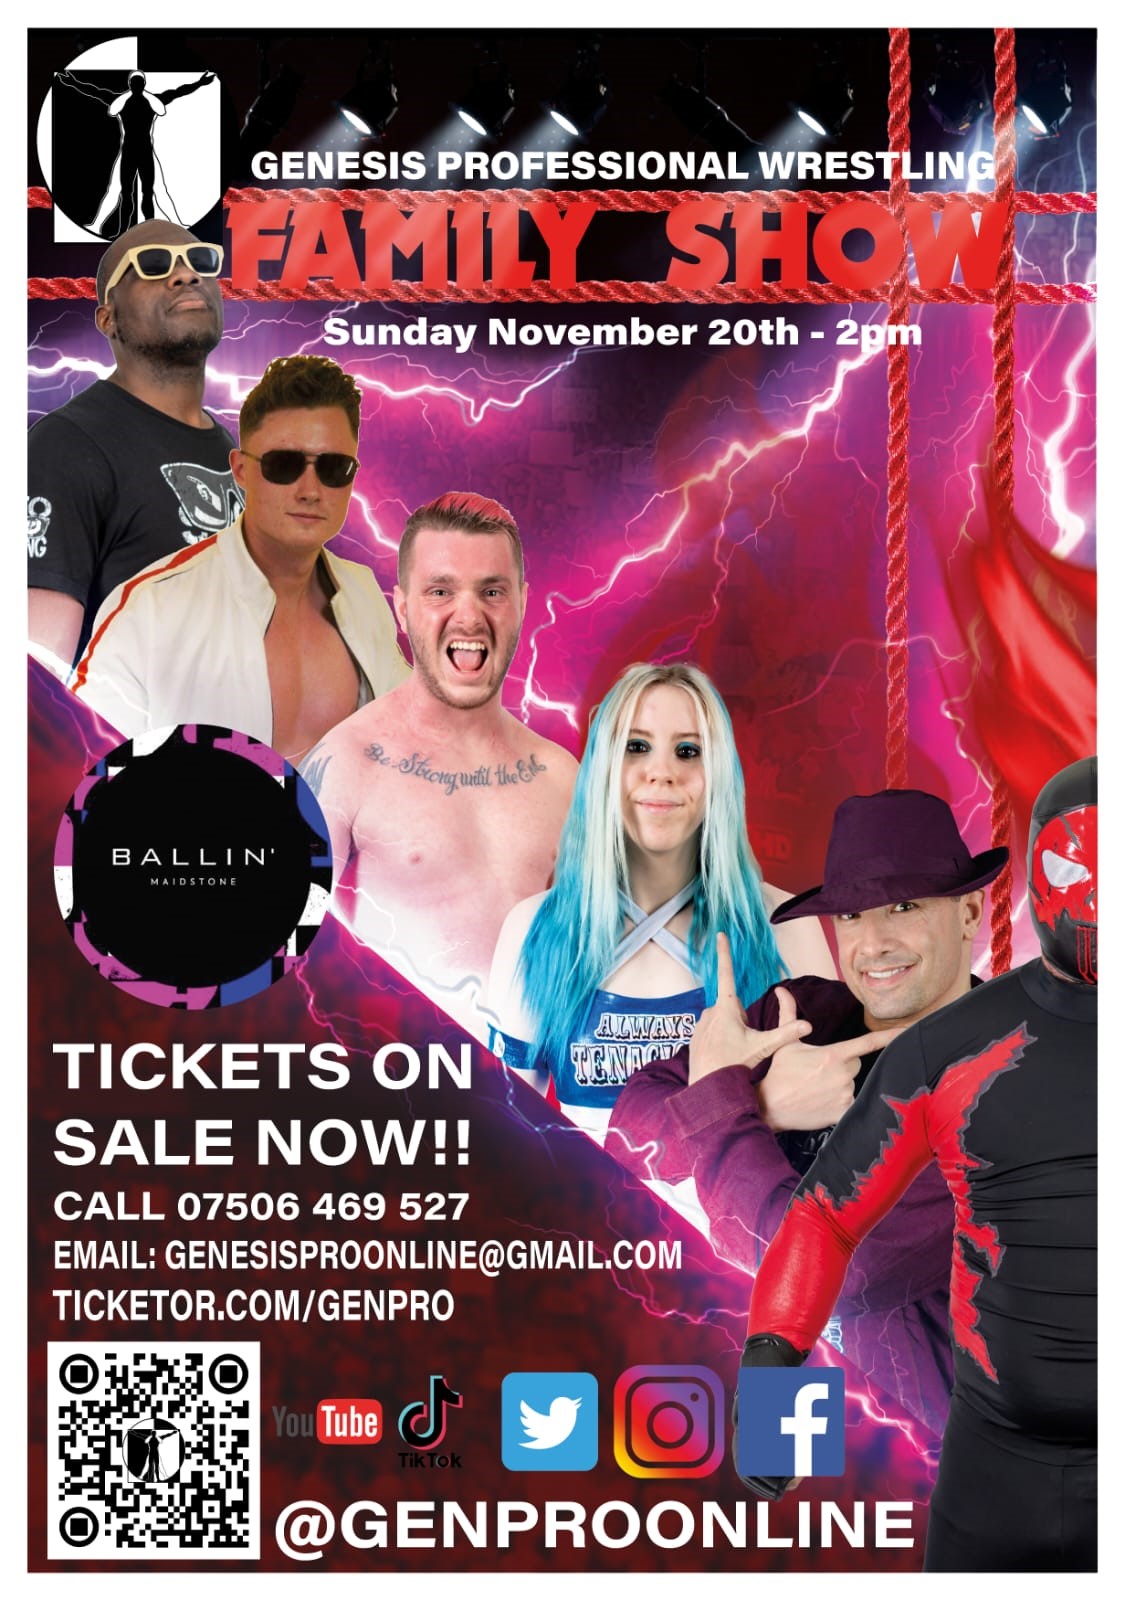 Genesis Professional Wrestling Ballin' Maidstone, family Show 2PM on nov. 20, 14:00@Ballin' - Pick a seat, Buy tickets and Get information on Genesis Professional Wrestling 